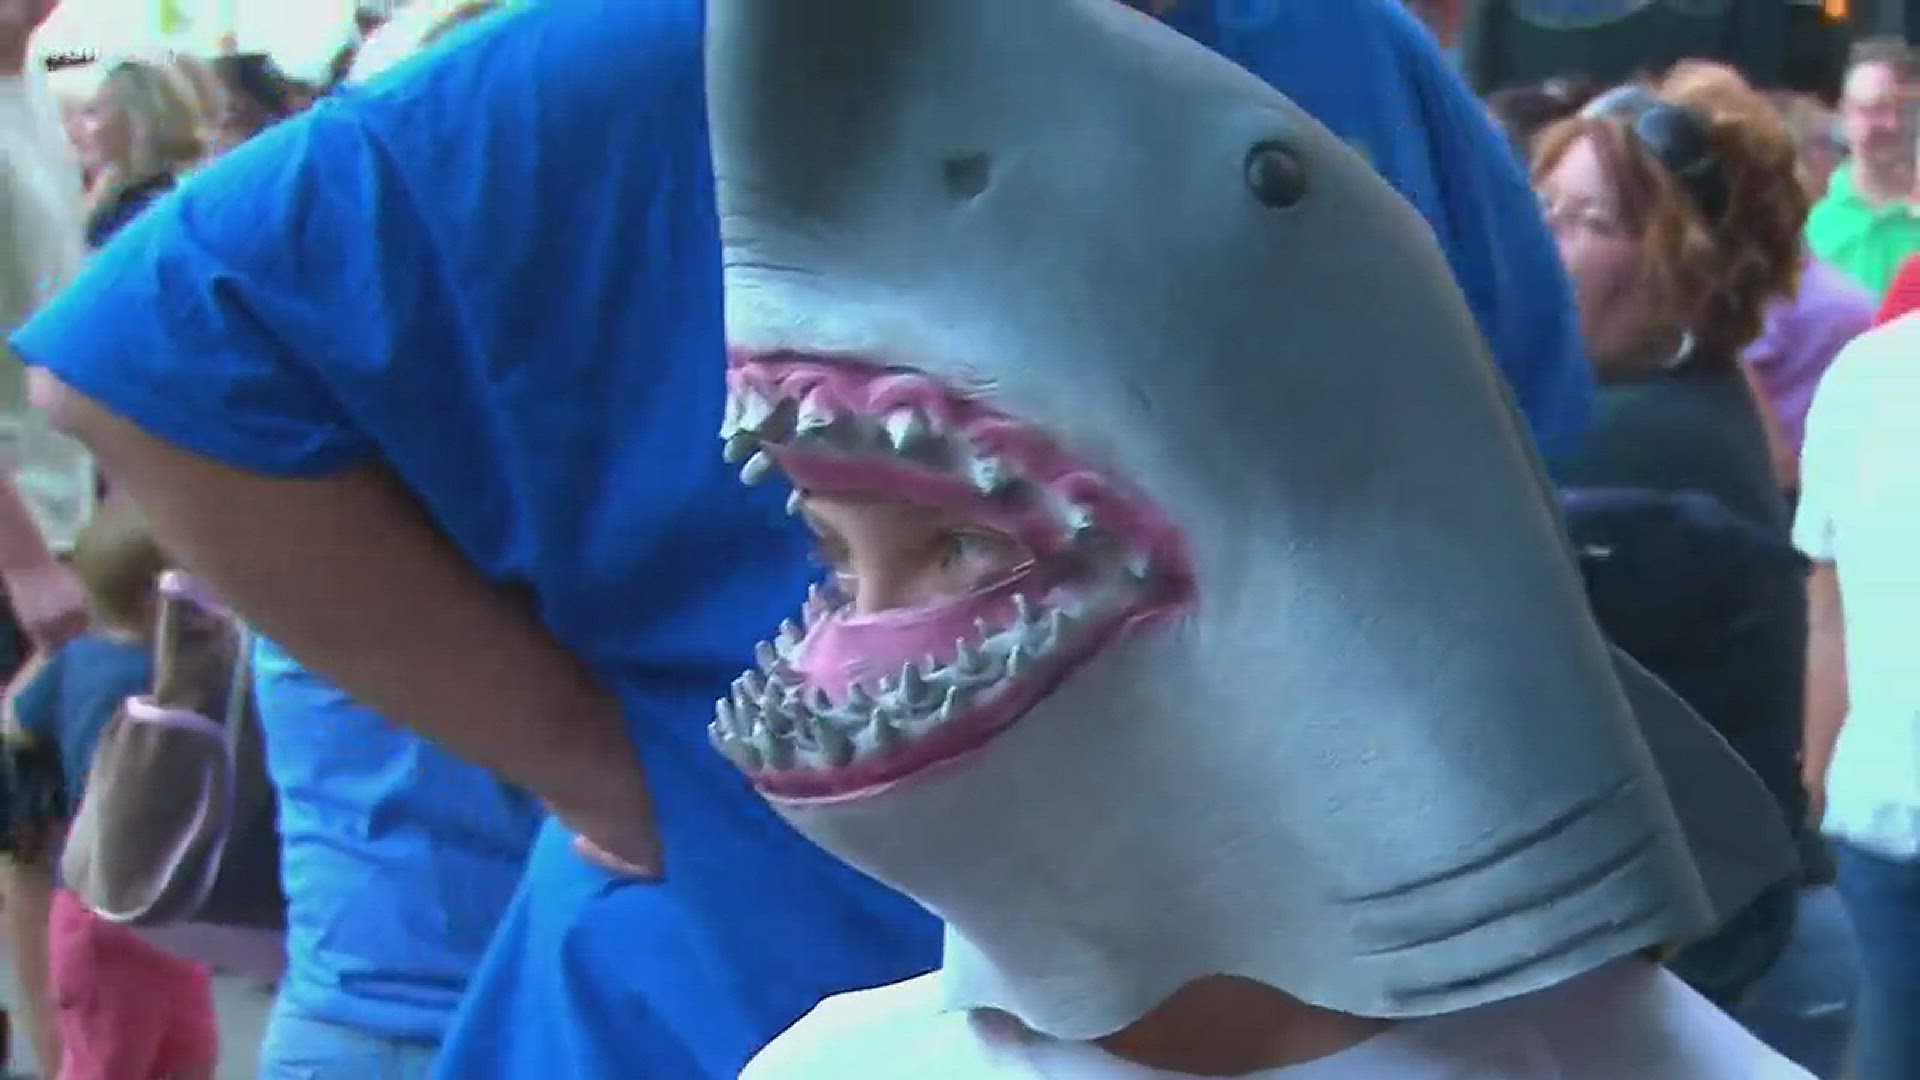 Hundreds of people came out to play shark themed games, get shark tattoos, watch a never before seen shark week special.